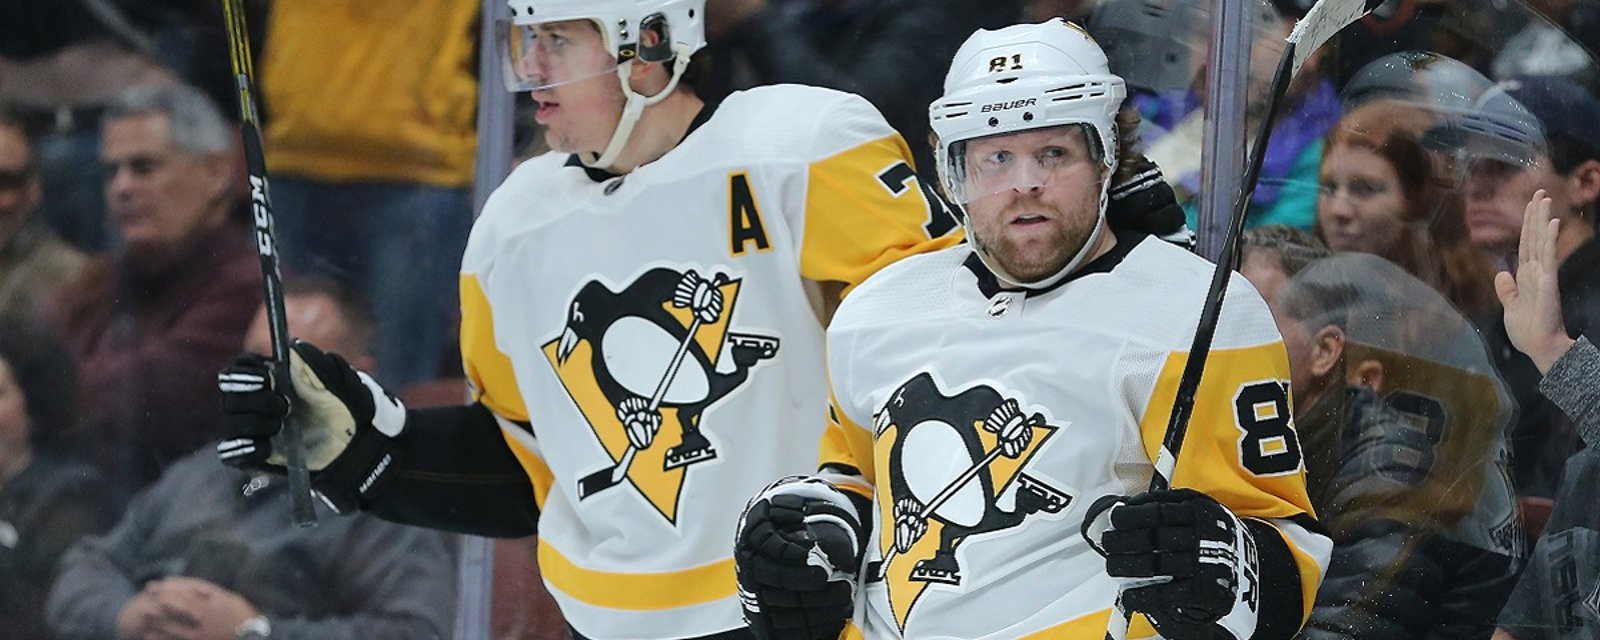 NHL insider reveals the real motivation behind the Kessel trade.